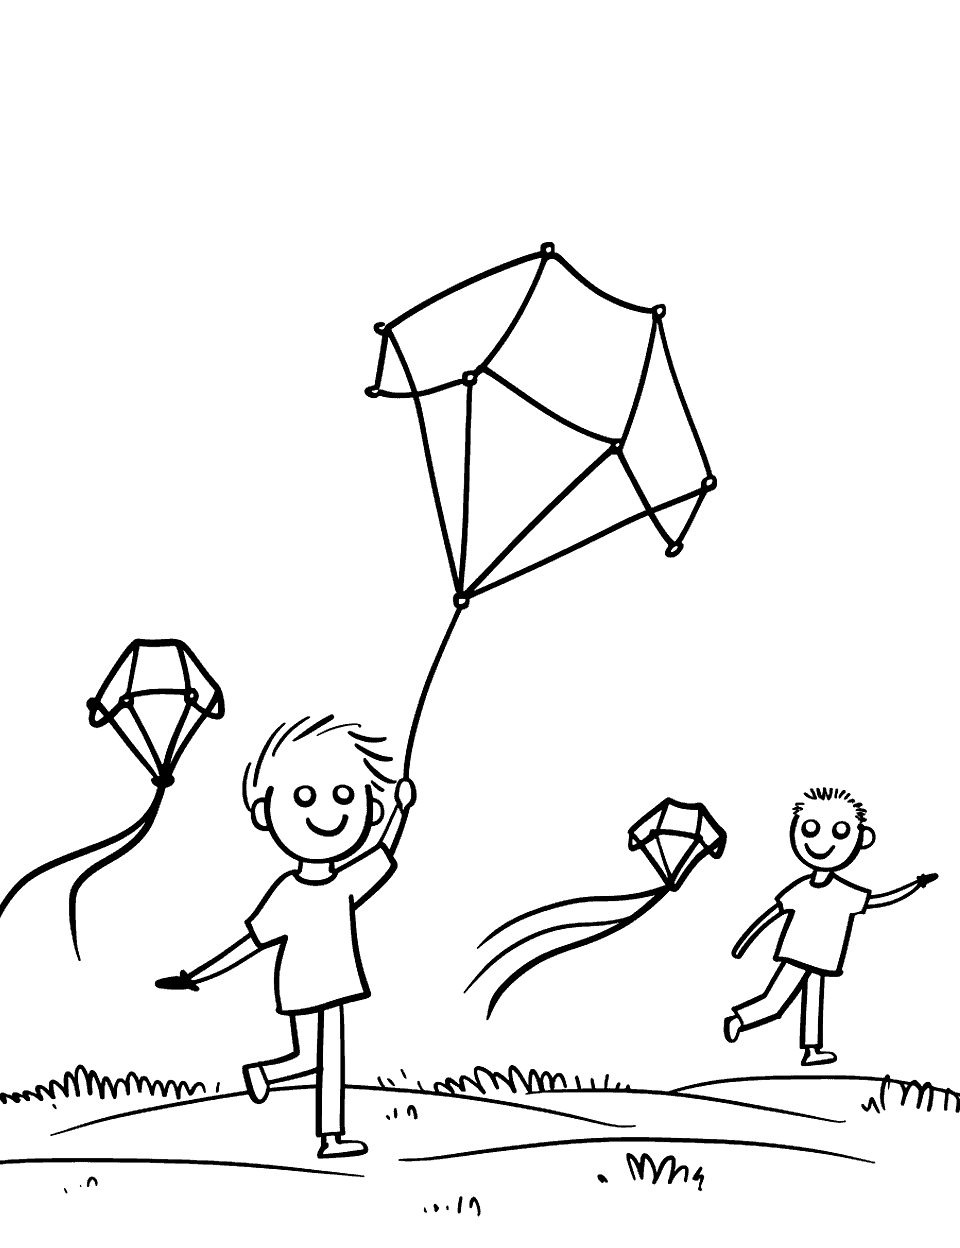 Cool Kite Festival Shapes Coloring Page - Kids running with kites shaped like geometric figures against a clear sky.